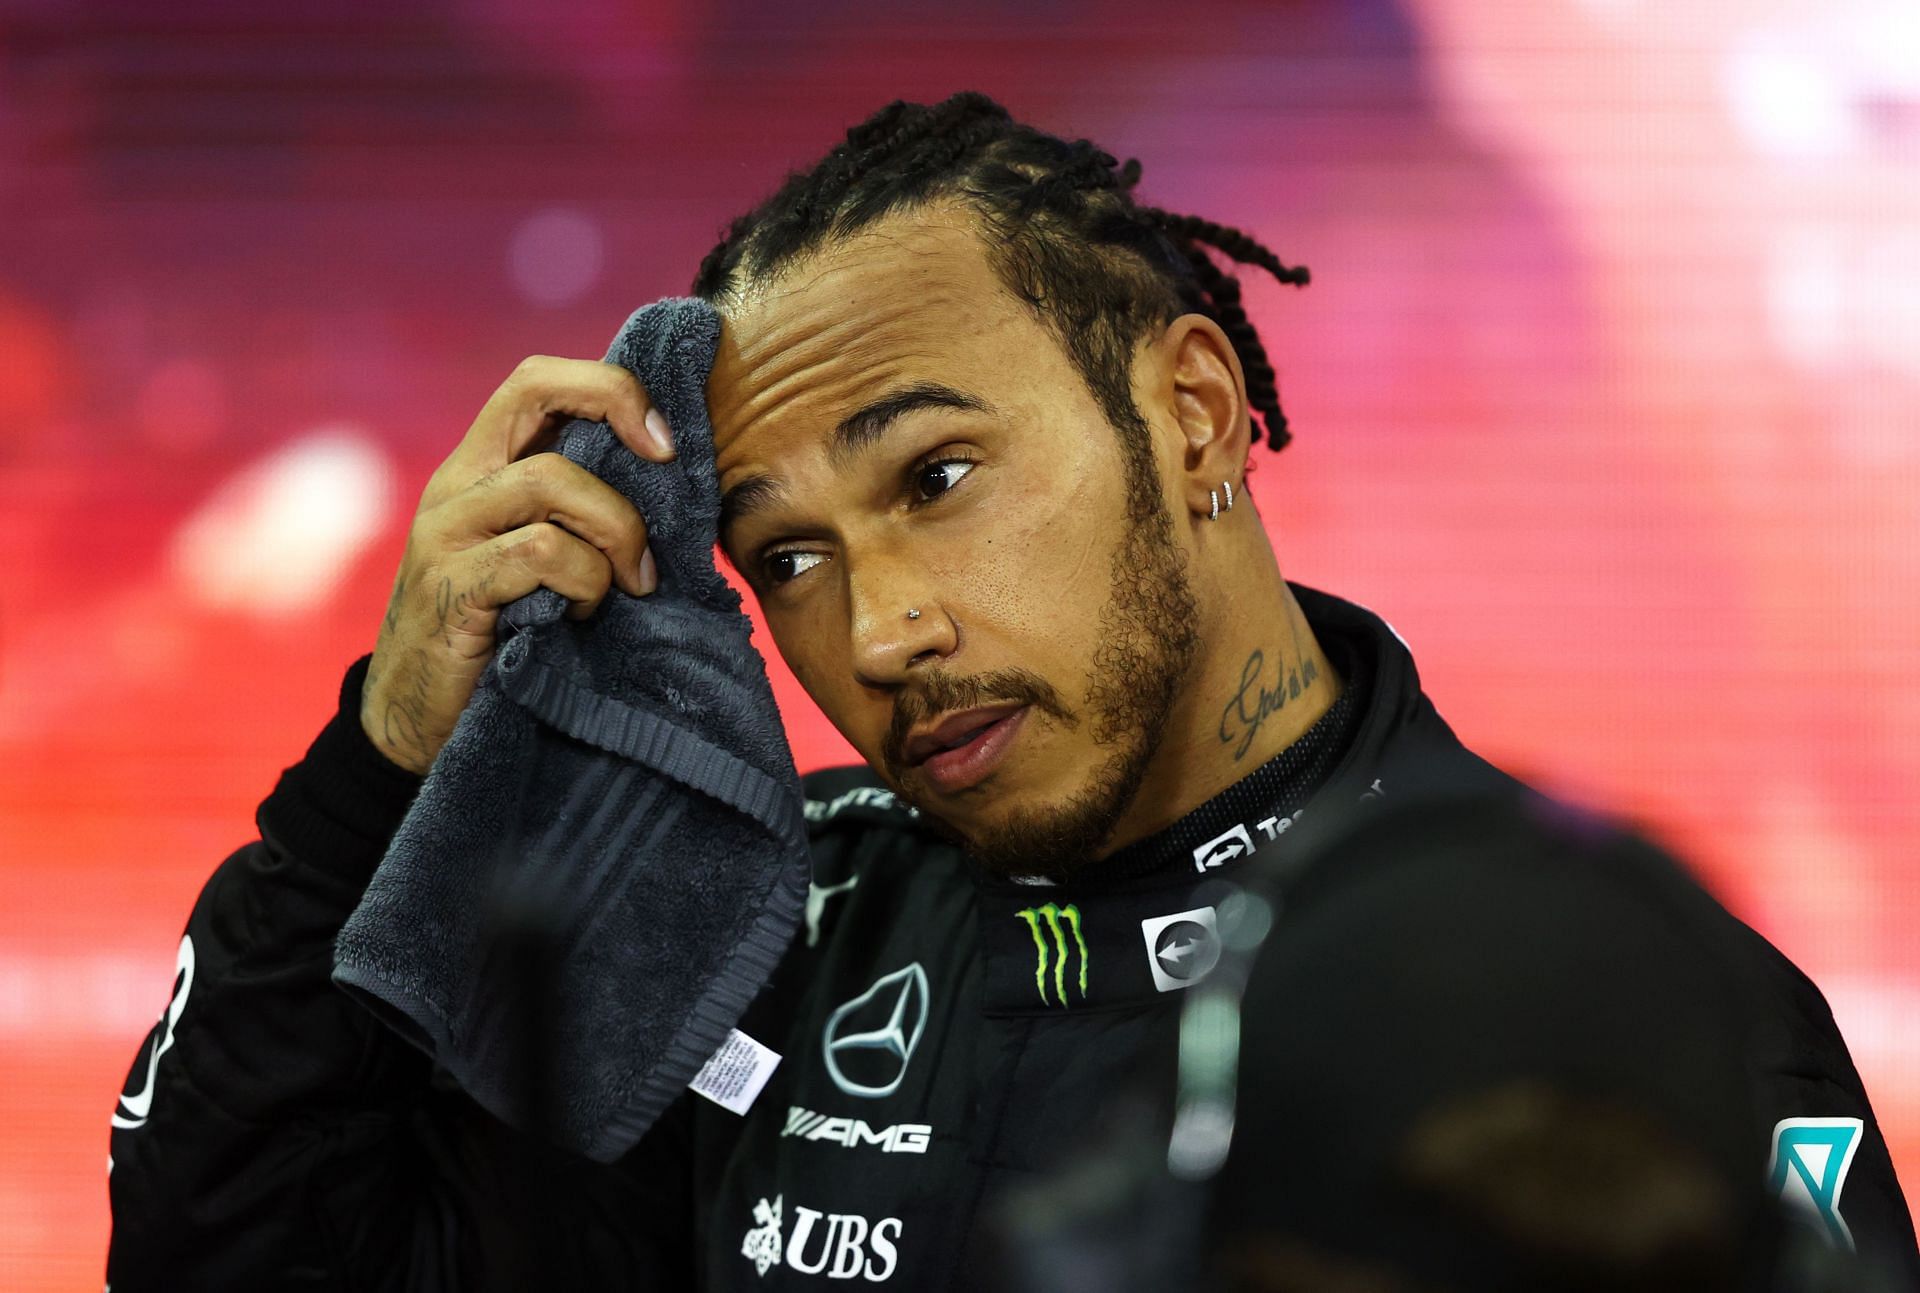 Second-placed and championship runner-up Lewis Hamilton looks dejected in parc ferm&eacute; during the 2021 Abu Dhabi GP (Photo by Bryn Lennon/Getty Images)